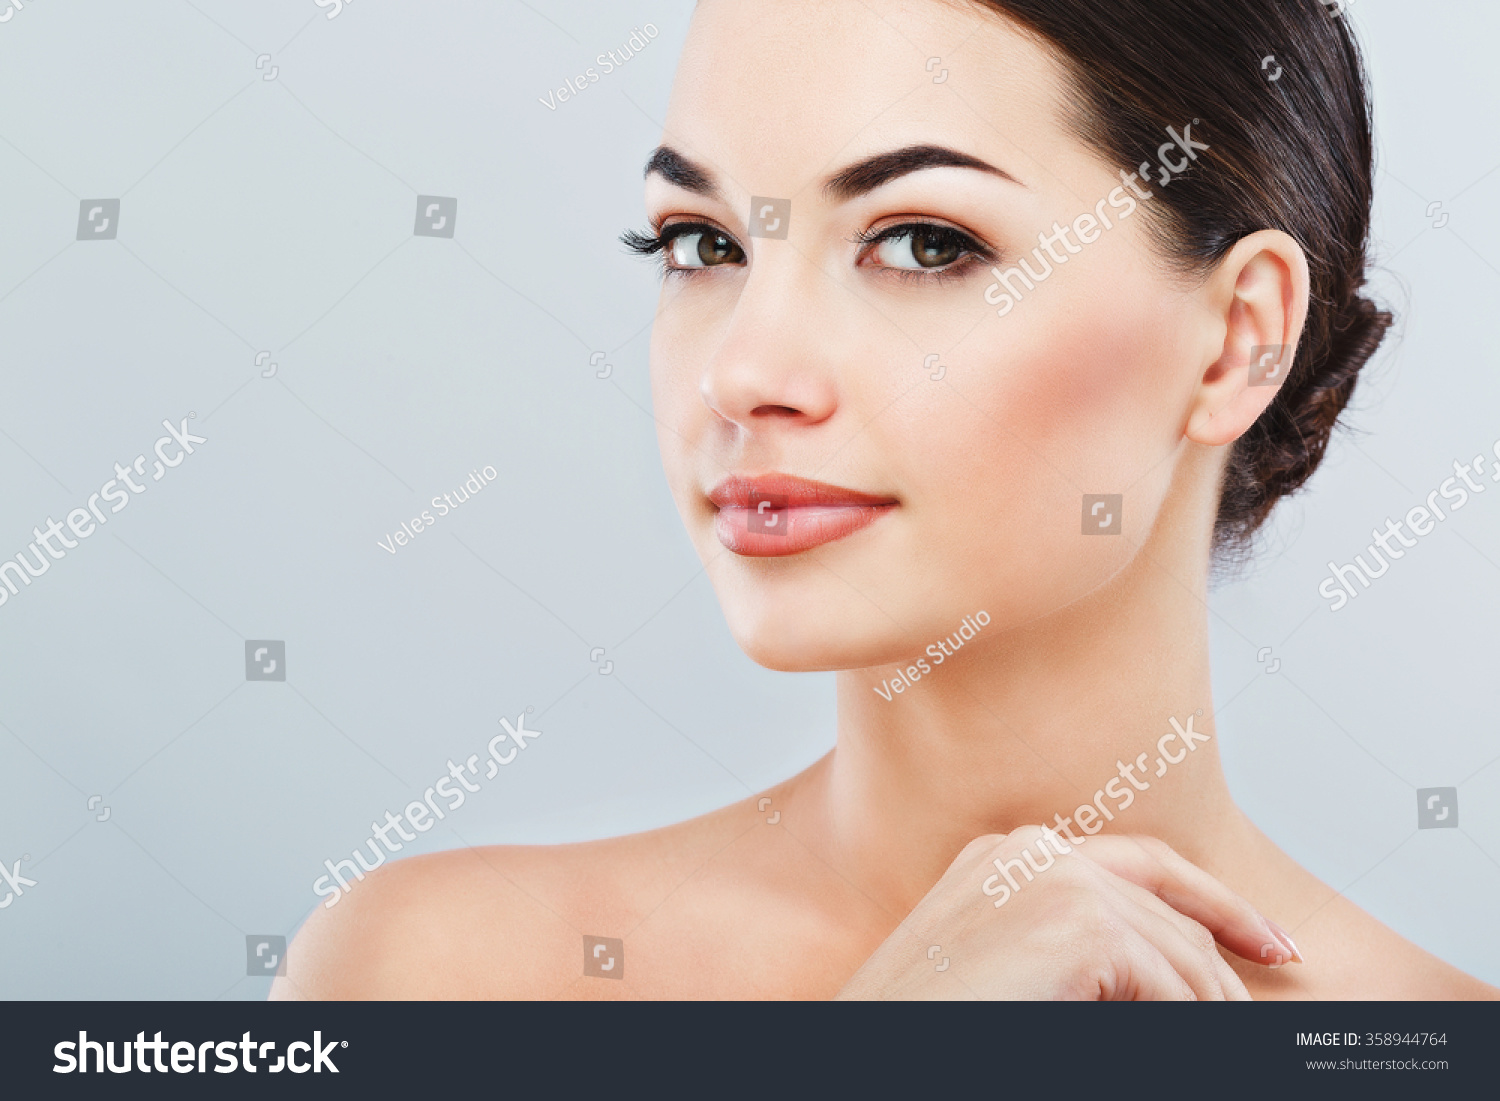 Pretty Girl With Big Eyes And Dark Eyebrows With Naked Shoulders Looking At Camera And Smiling